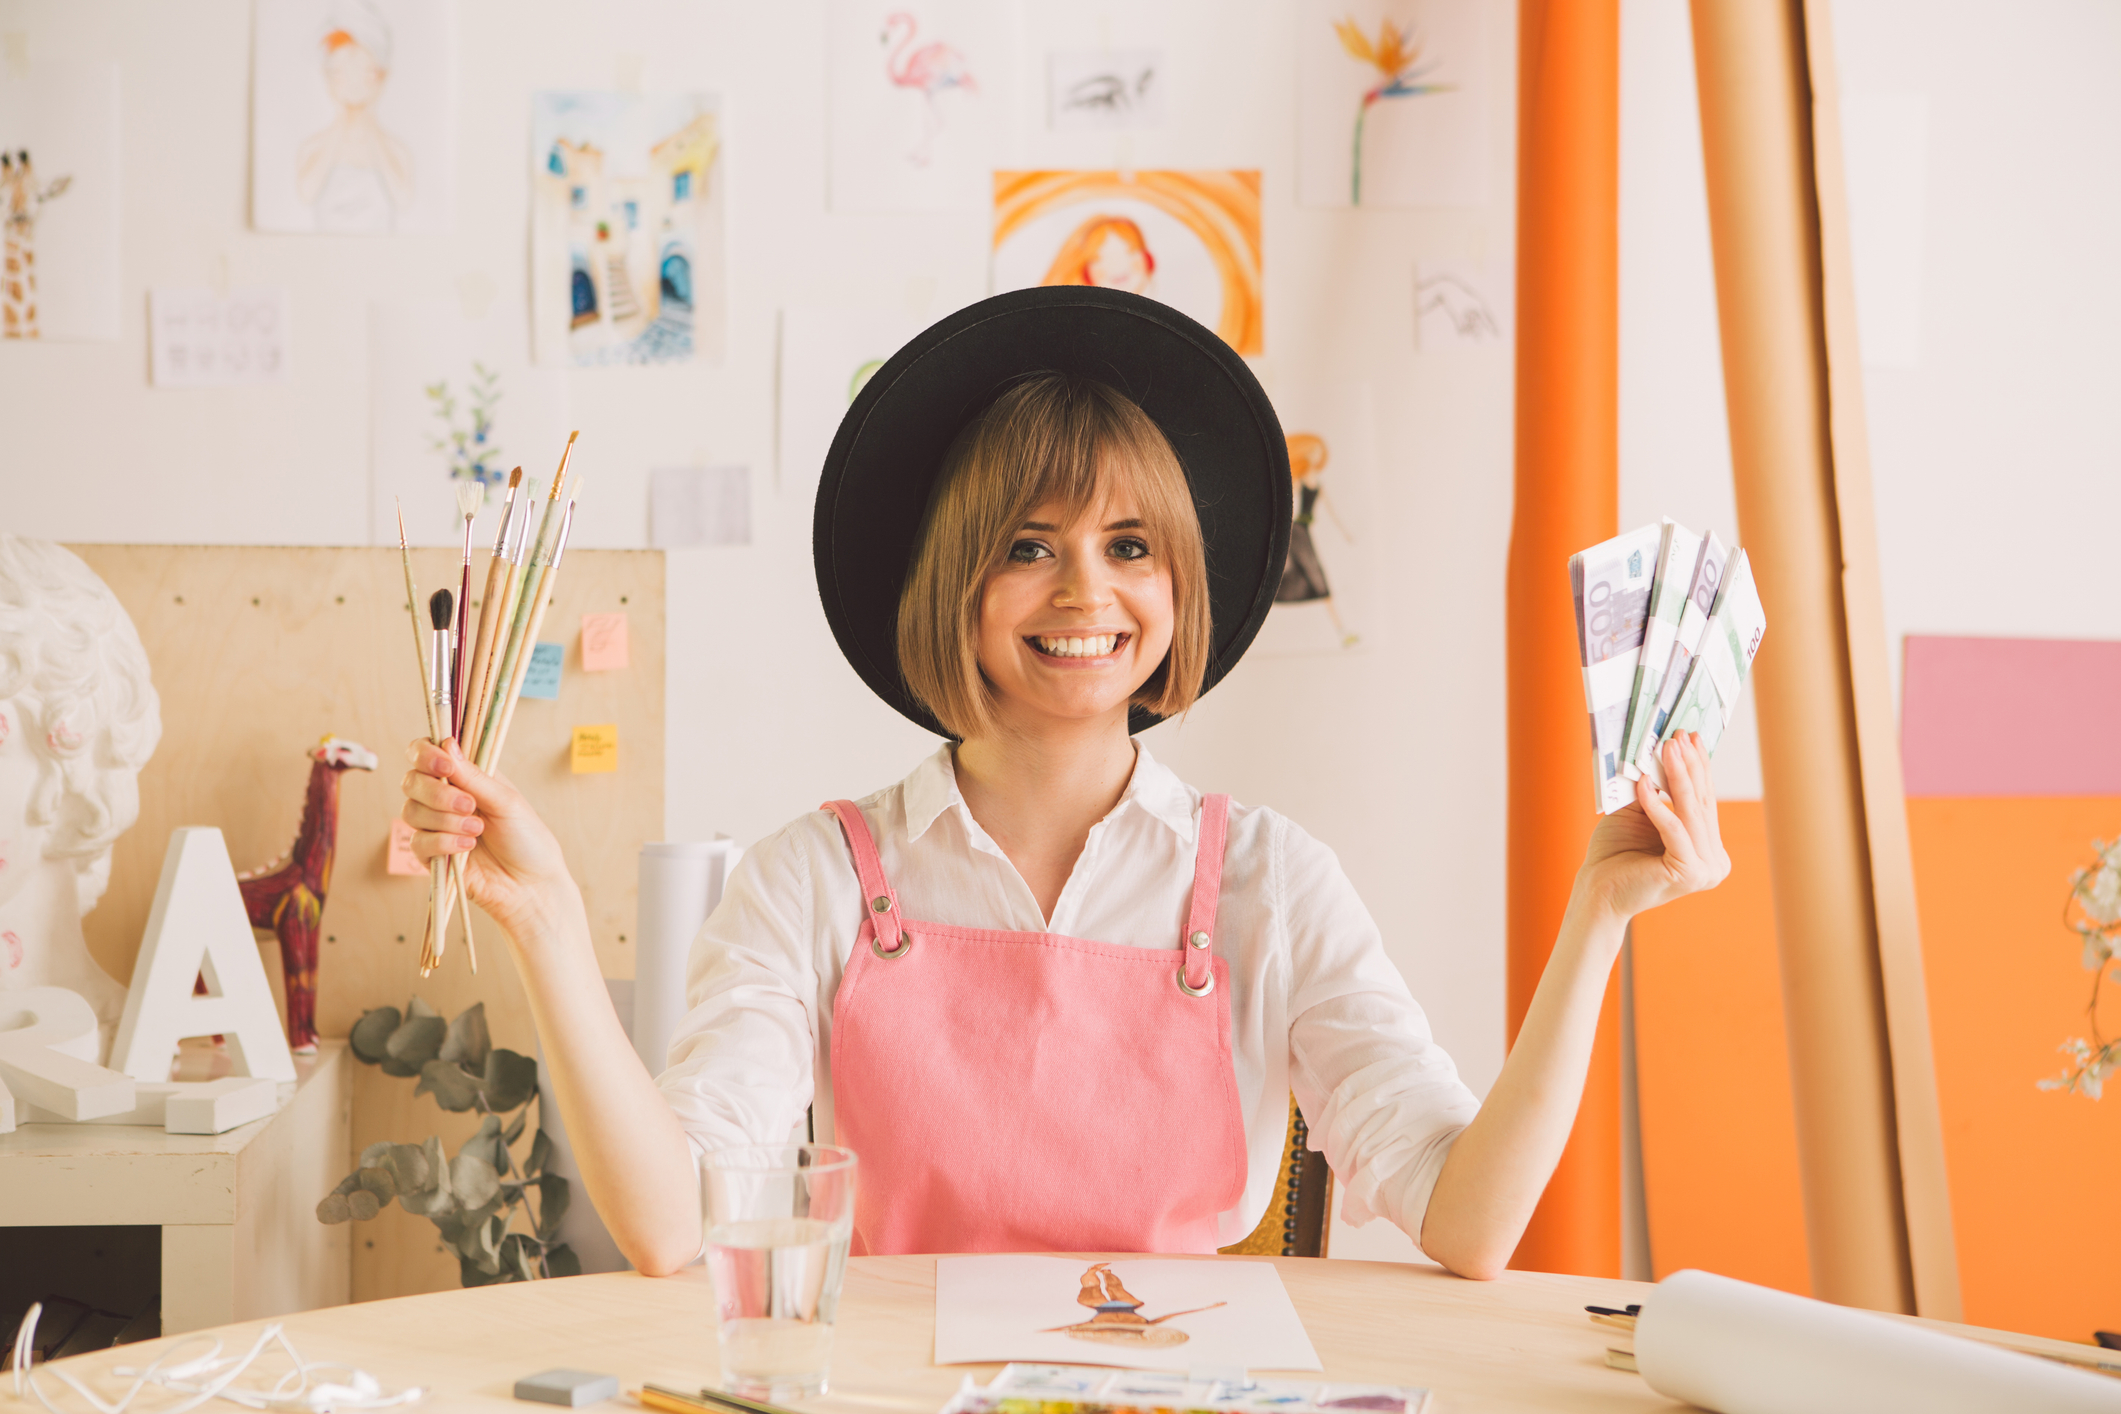 Female artist wearing a hat holding paintbrushes and money.